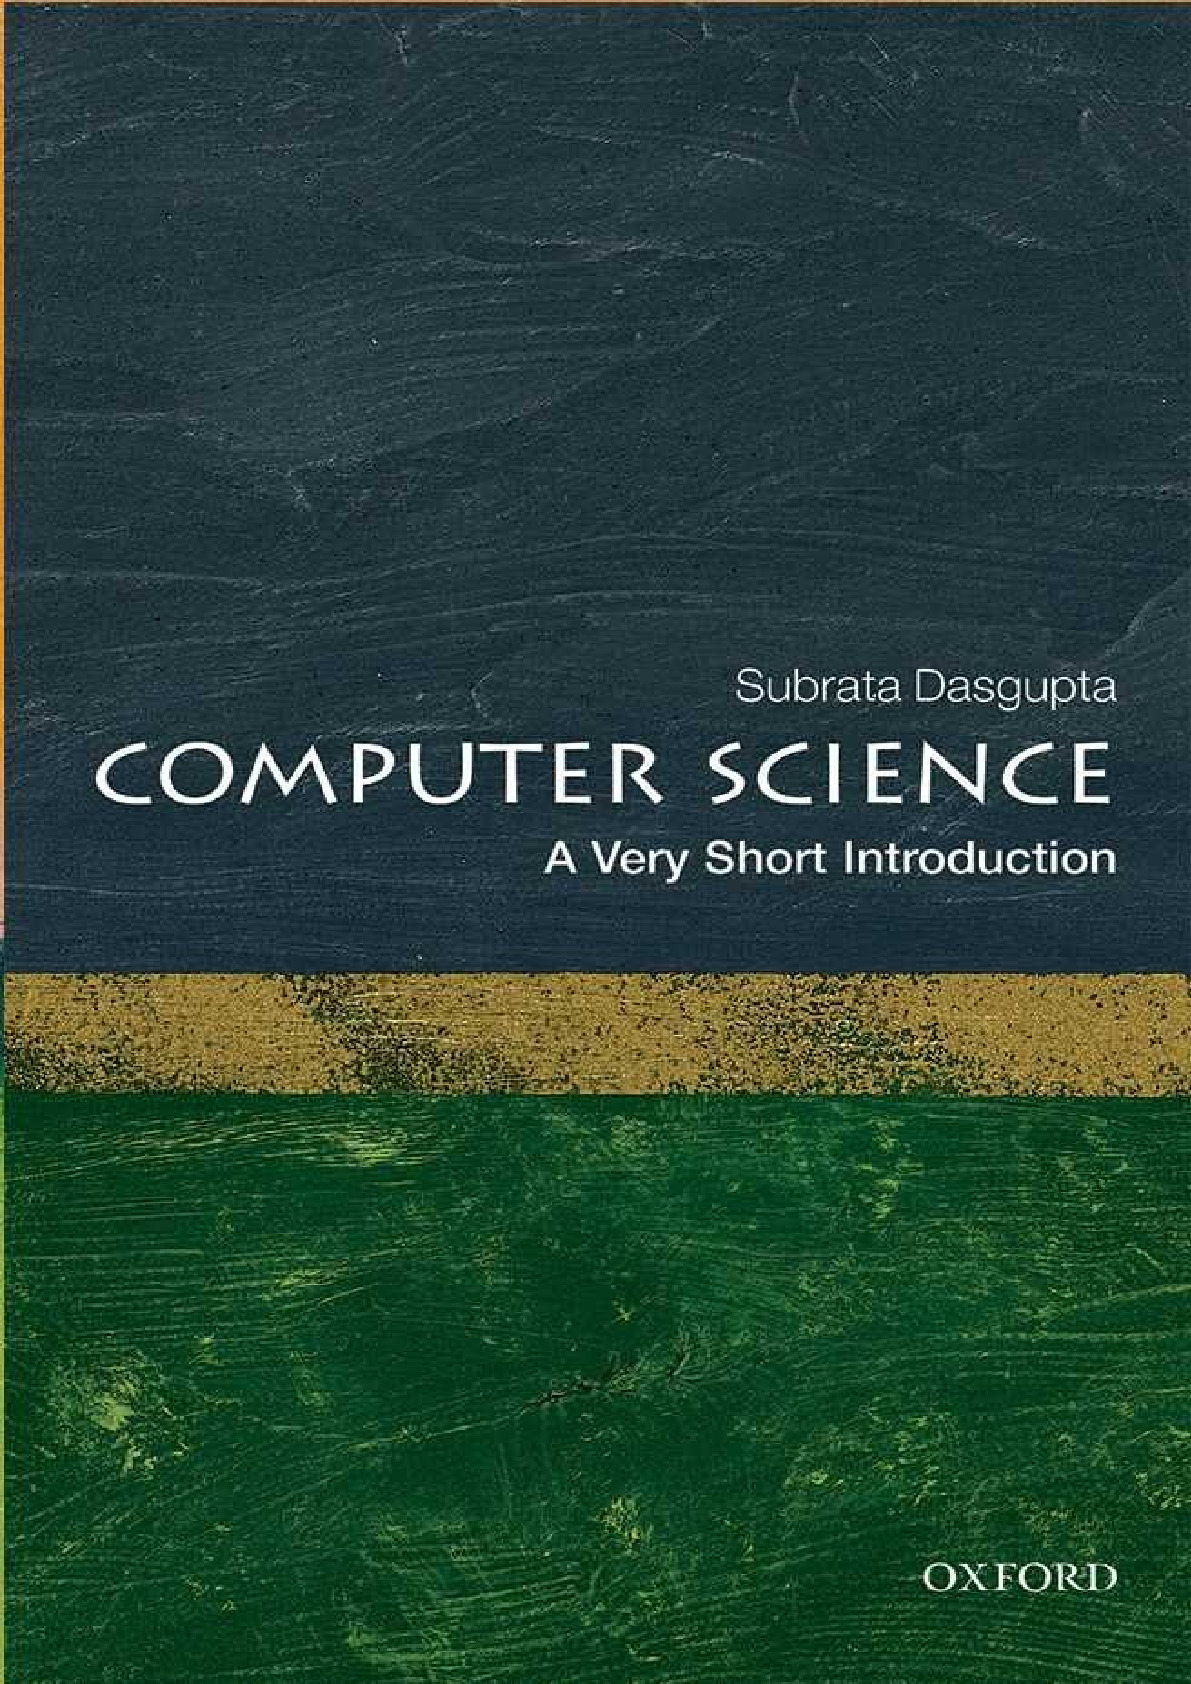 Computer Science_ A Very Short Introduction ( PDFDrive.com )